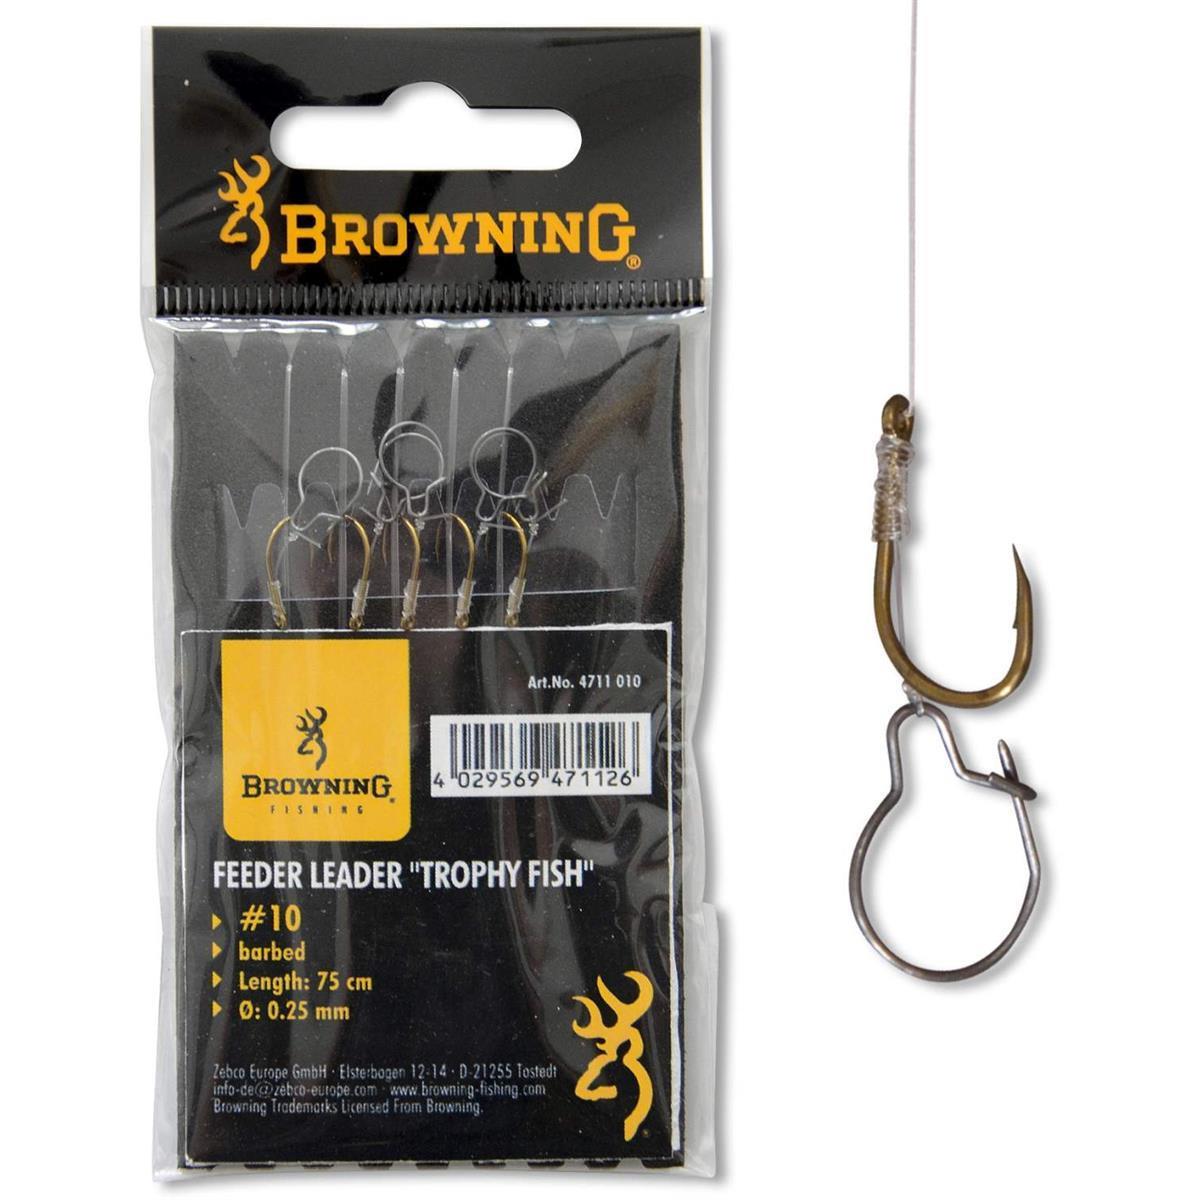 Browning Trophy Fish #12 barbed 0,22 mm 75 cm